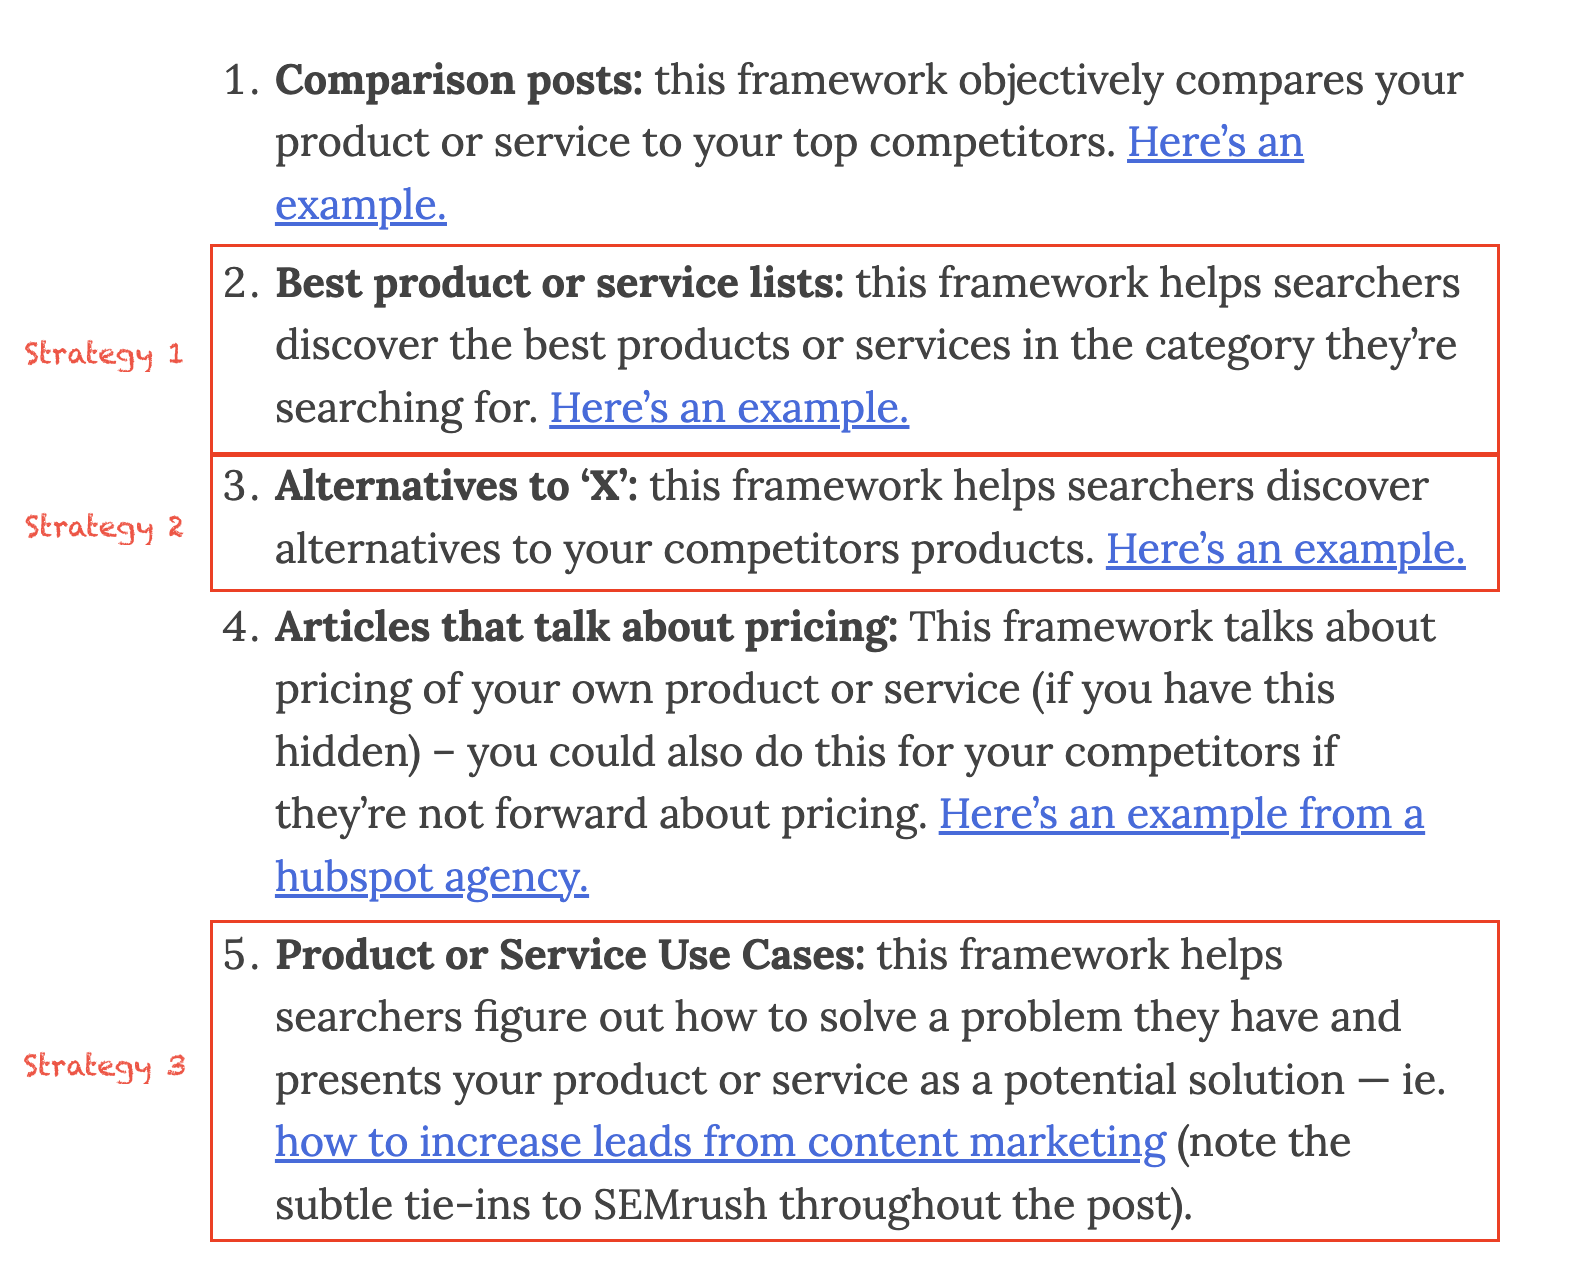 Strategy 1: Best Product or Service Lists; Strategy 2: Alternatives to 'X'; Strategy 3: Product or Service Use Cases